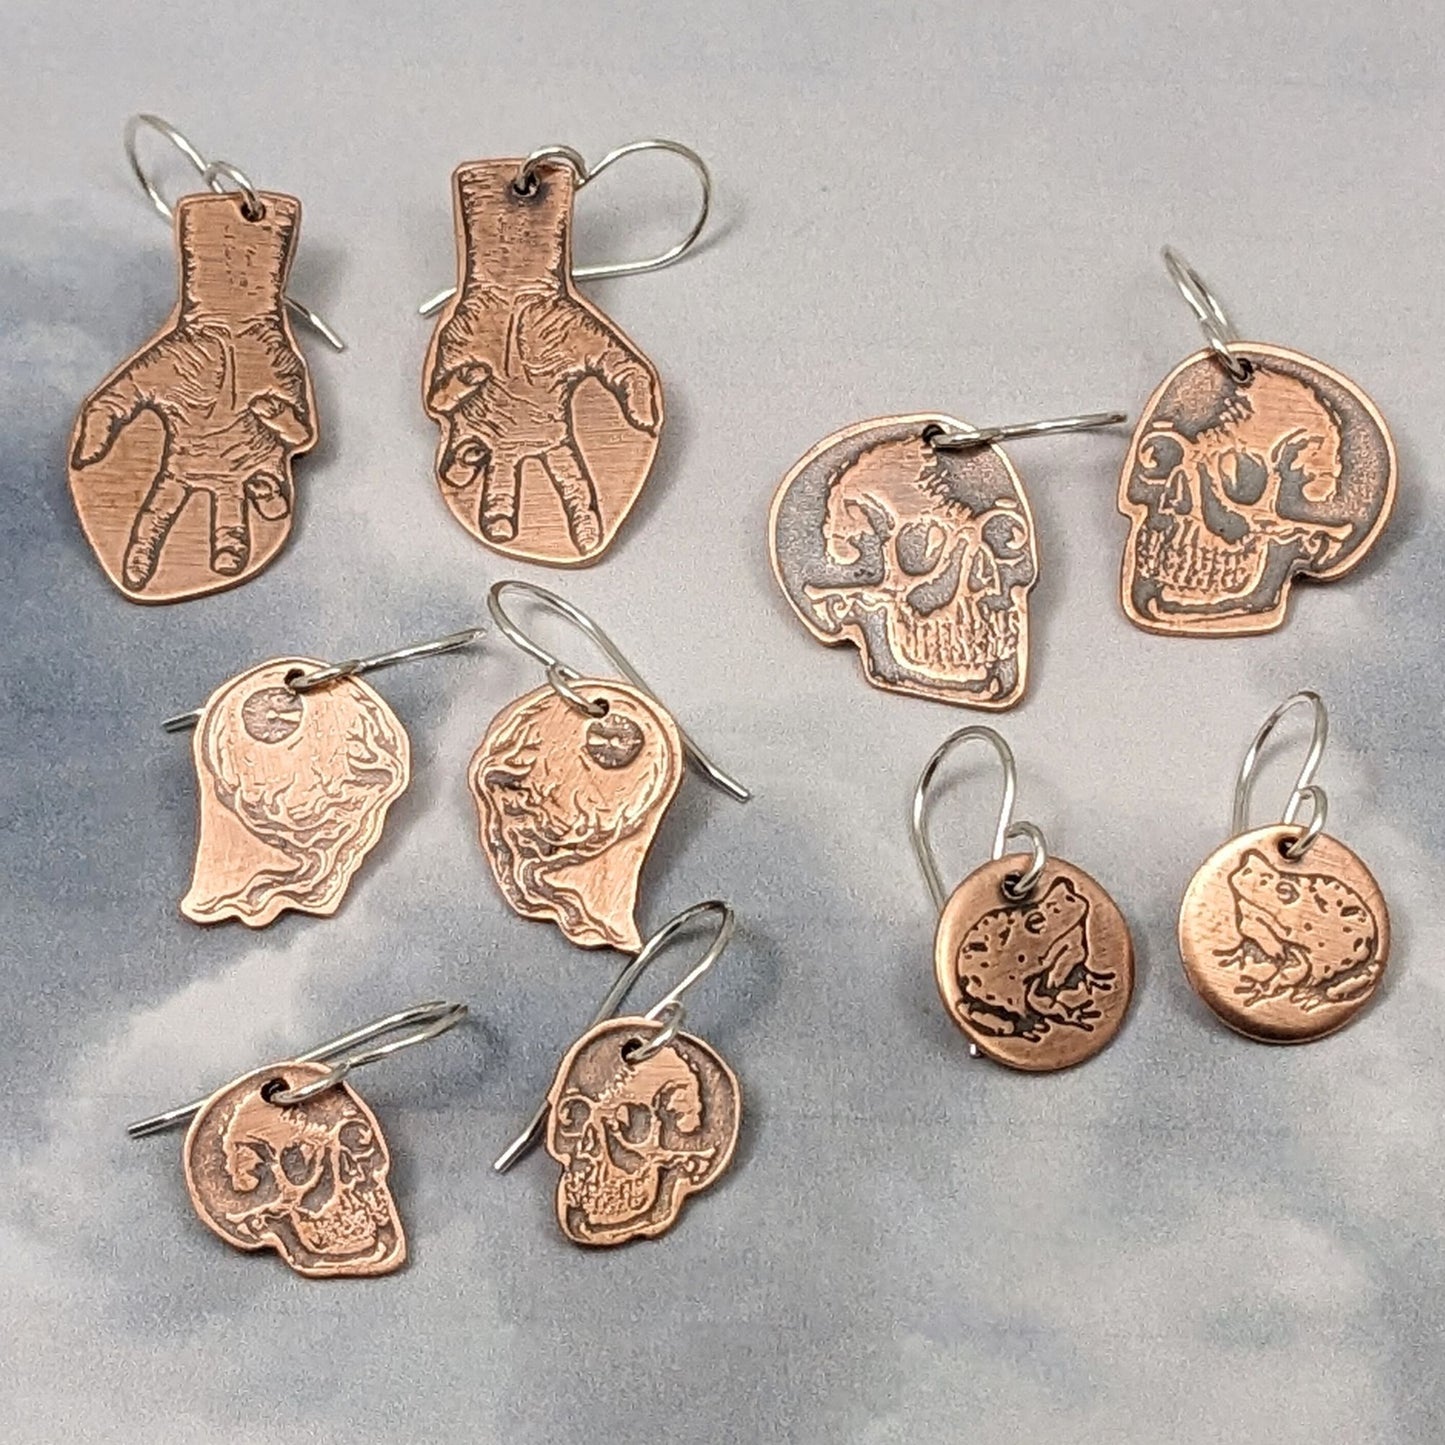 Copper earrings with halloween designs. hands, skulls, brains, and frogs